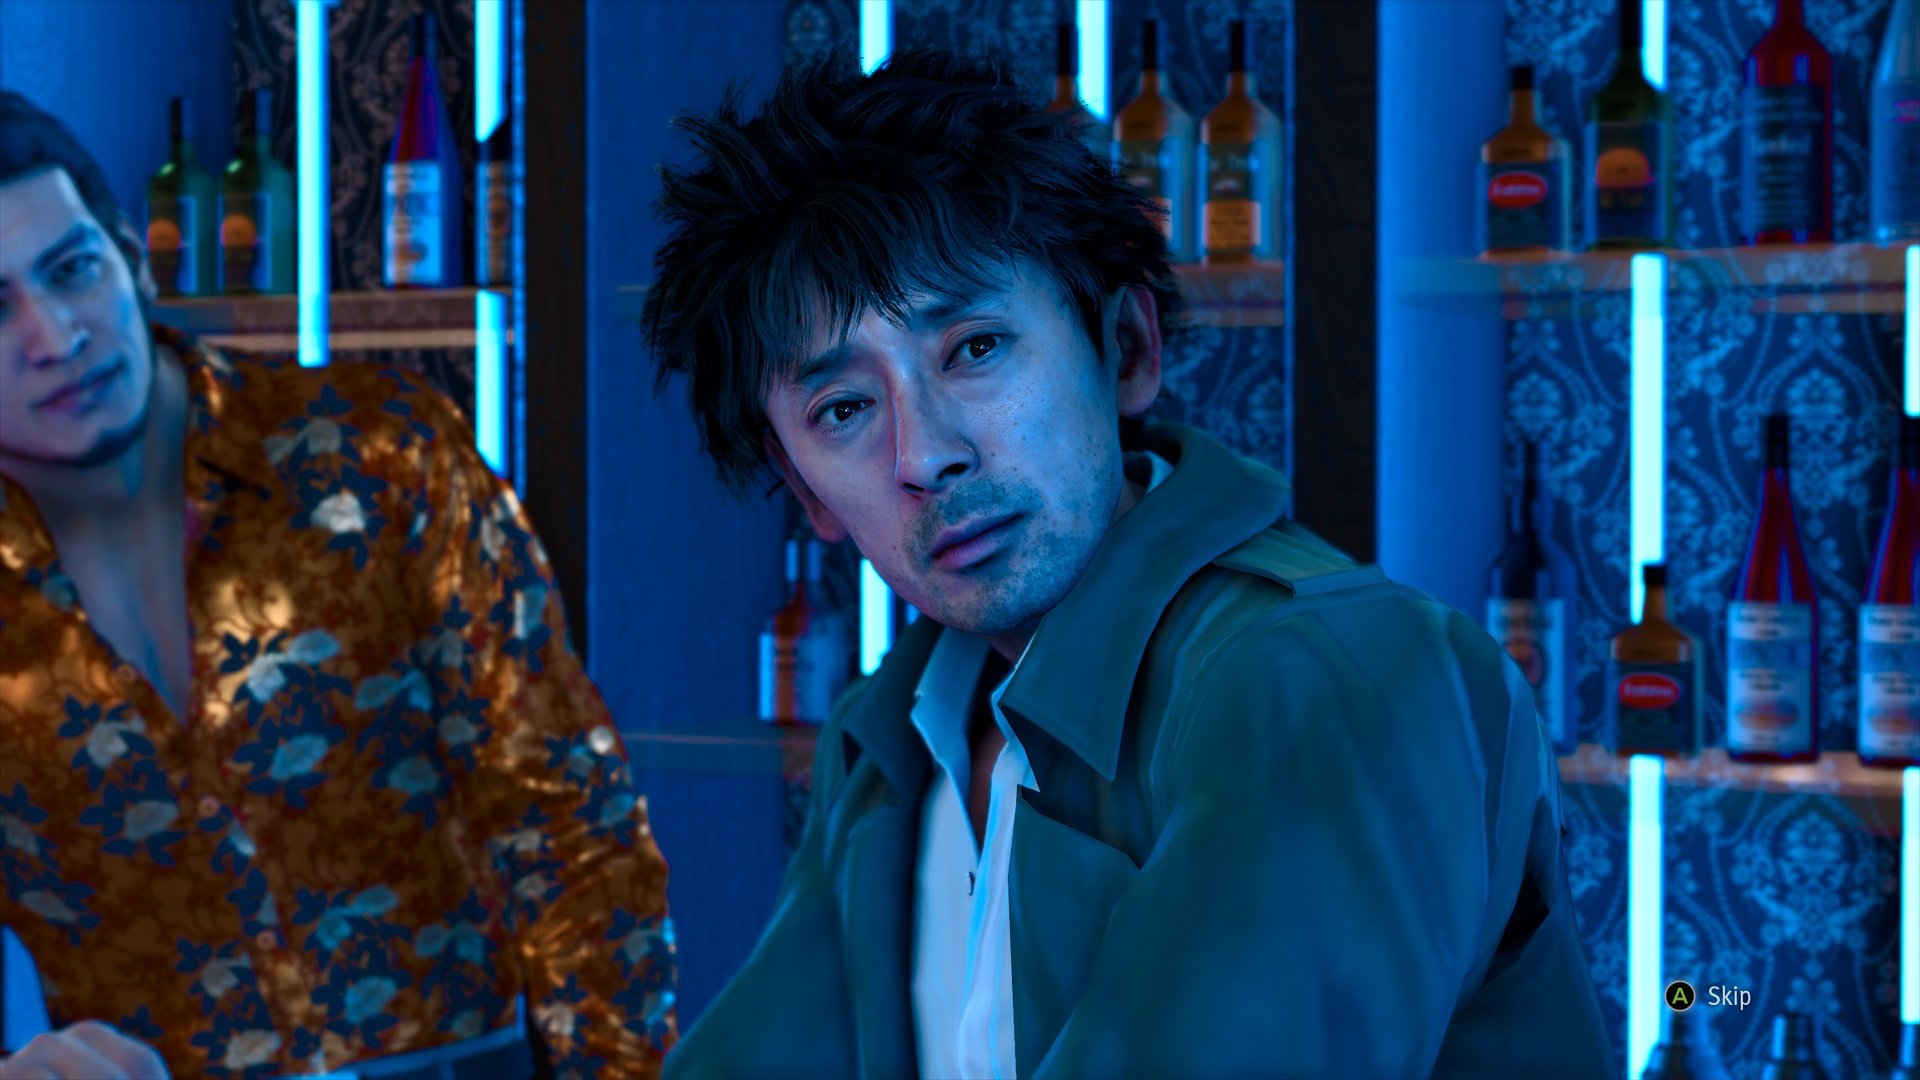 Ayabe character close-up with blue light cast across his face